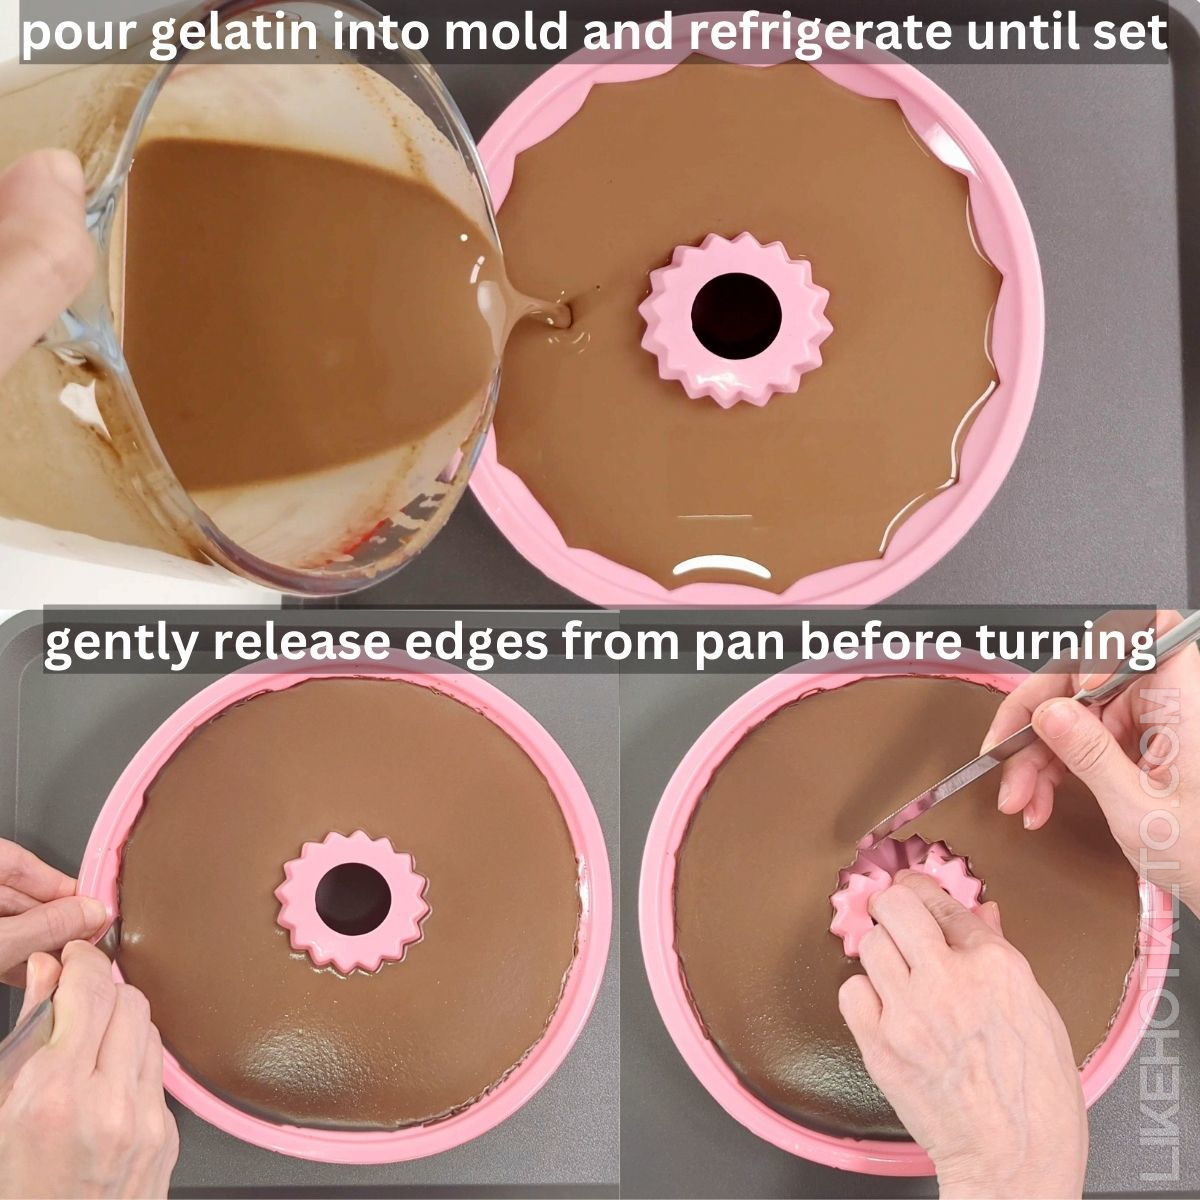 Pouring the chocolate protein jello into a silicone mold, then loosening the edges of the set jello with a knife before unmolding.